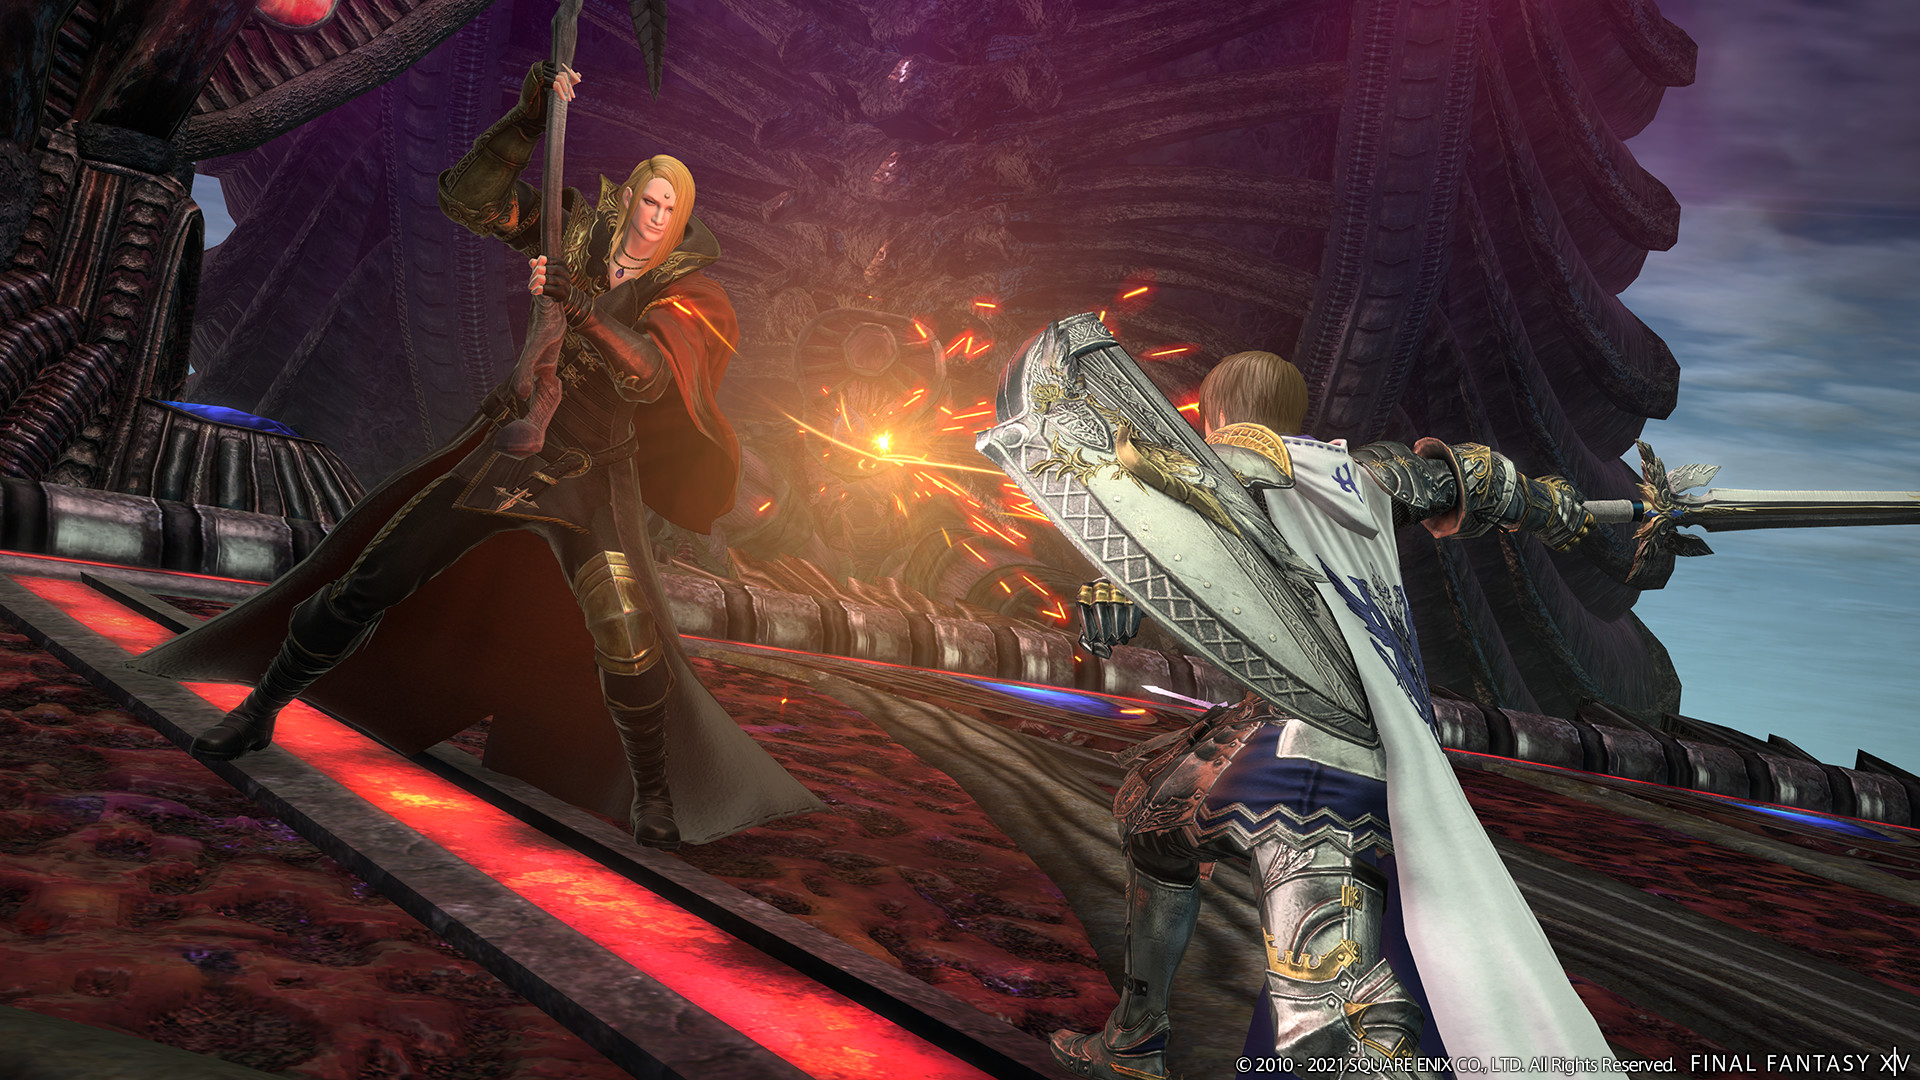 Final Fantasy XIV screenshot of two characters fighting each other